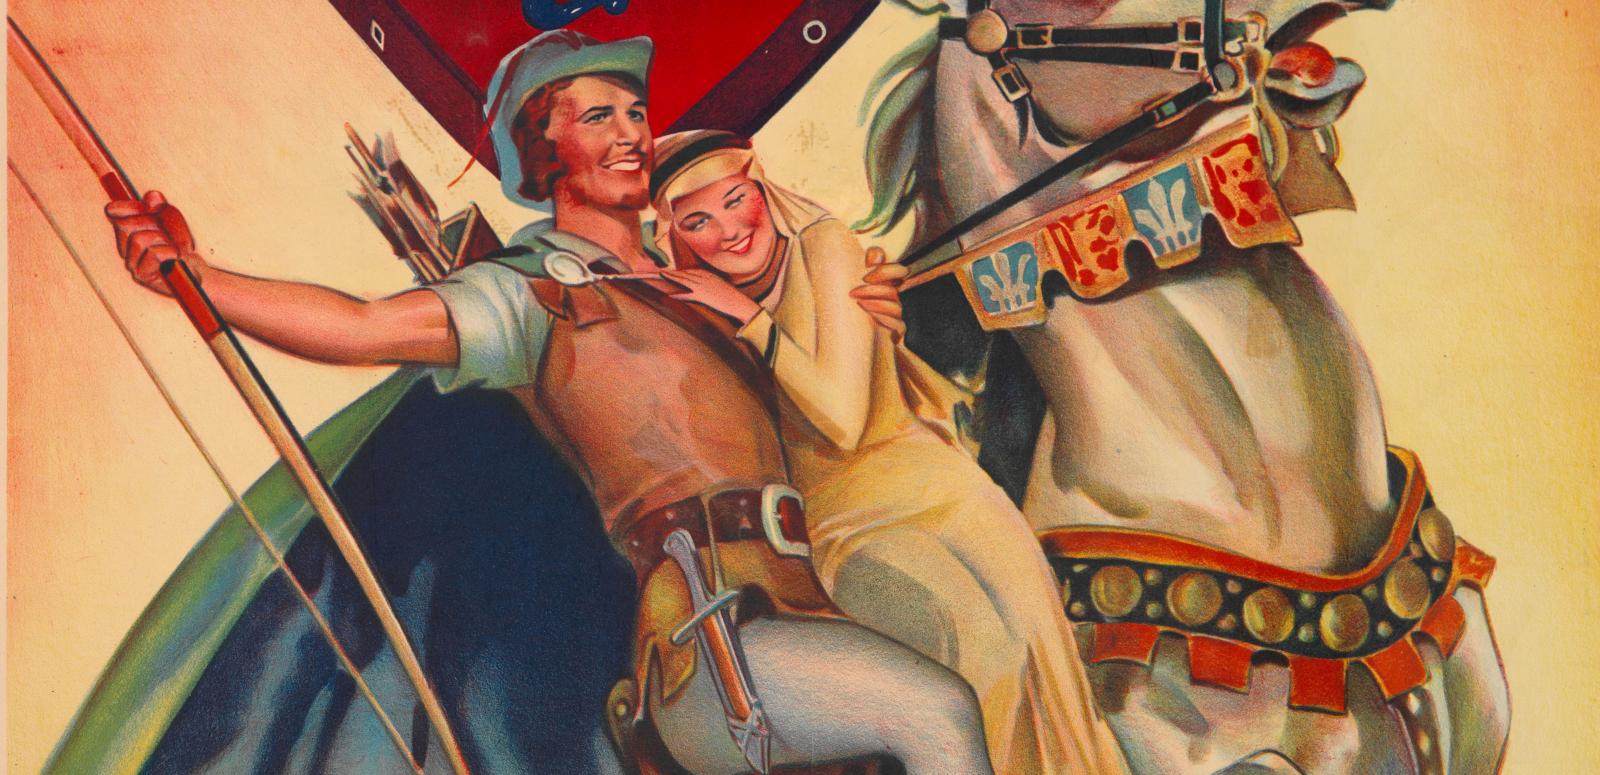 Close up of the poster for The Adventures of Robin Hood showing an illustration of Errol Flynn and Olivia de Havilland on a horse.